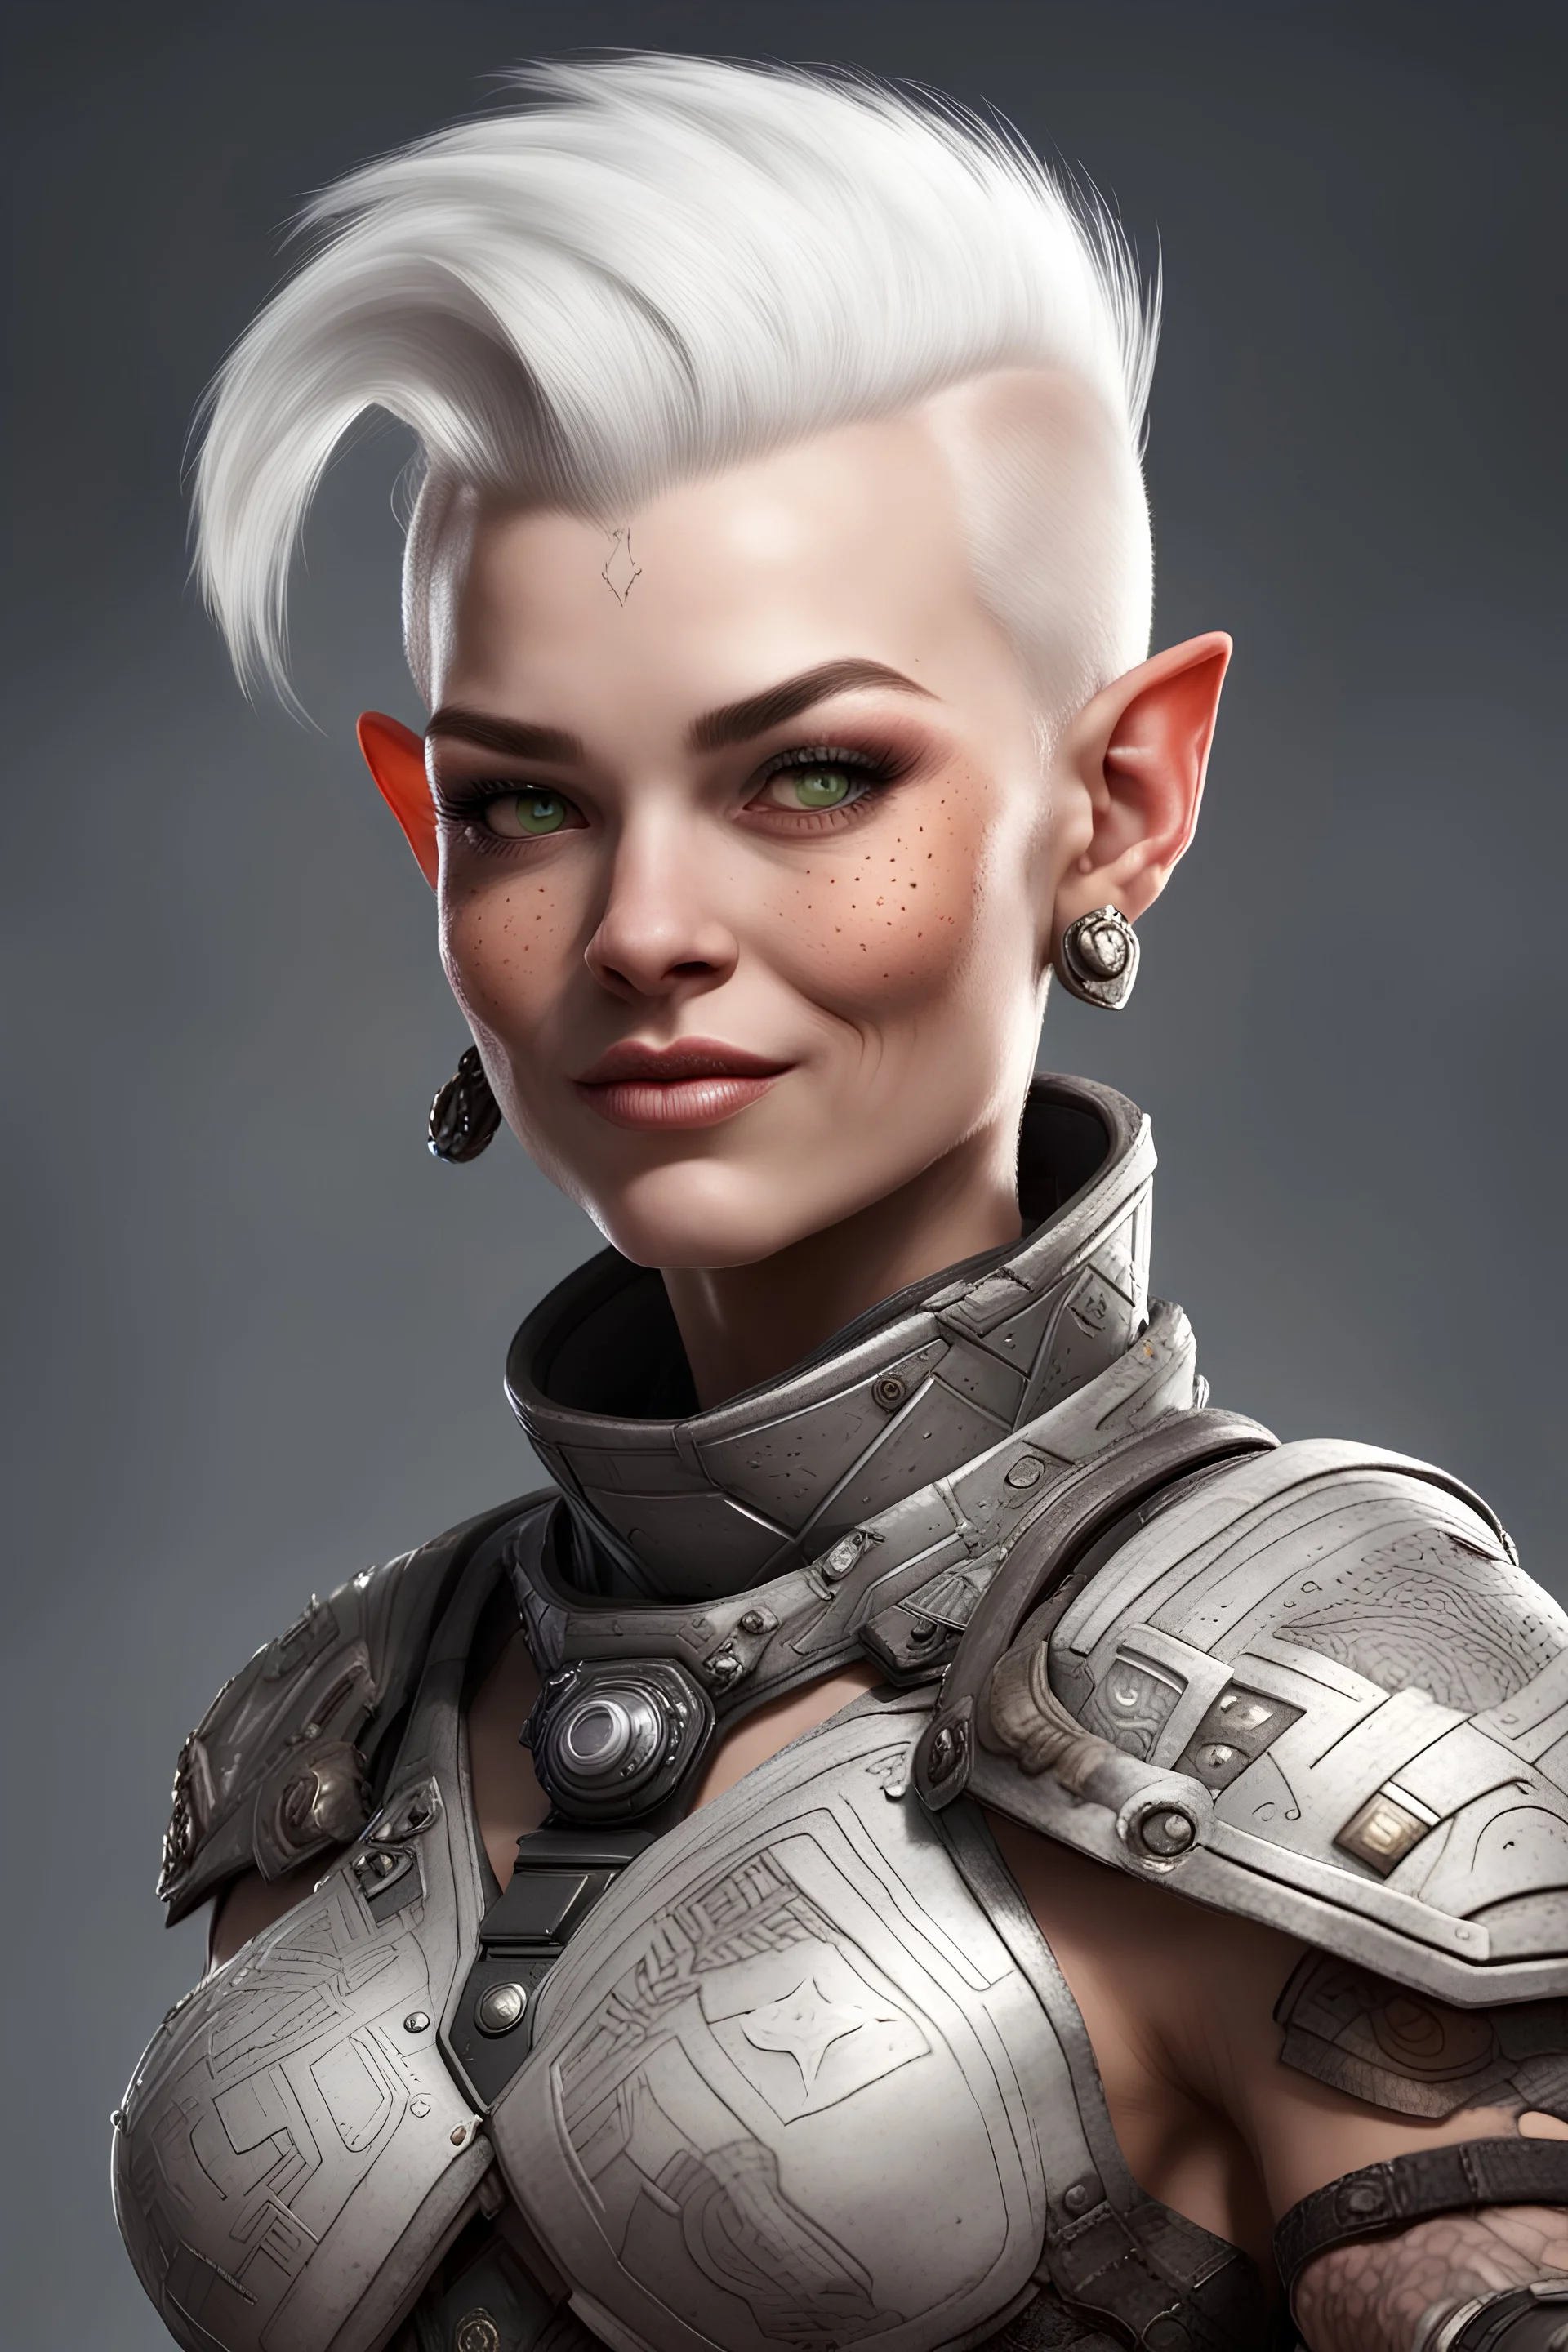 Female sci-fi mountain dwarf. Her short white hair is styled into a slicked back mohawk with intricate patterns shaved into the sides. She has fair skin with many freckles dotted across her cheeks and arms. The image she portrays is very typical of a dwarf - short and muscular with square features - however she always has a mischievous smile upon her face, accentuated by her vibrant green ey